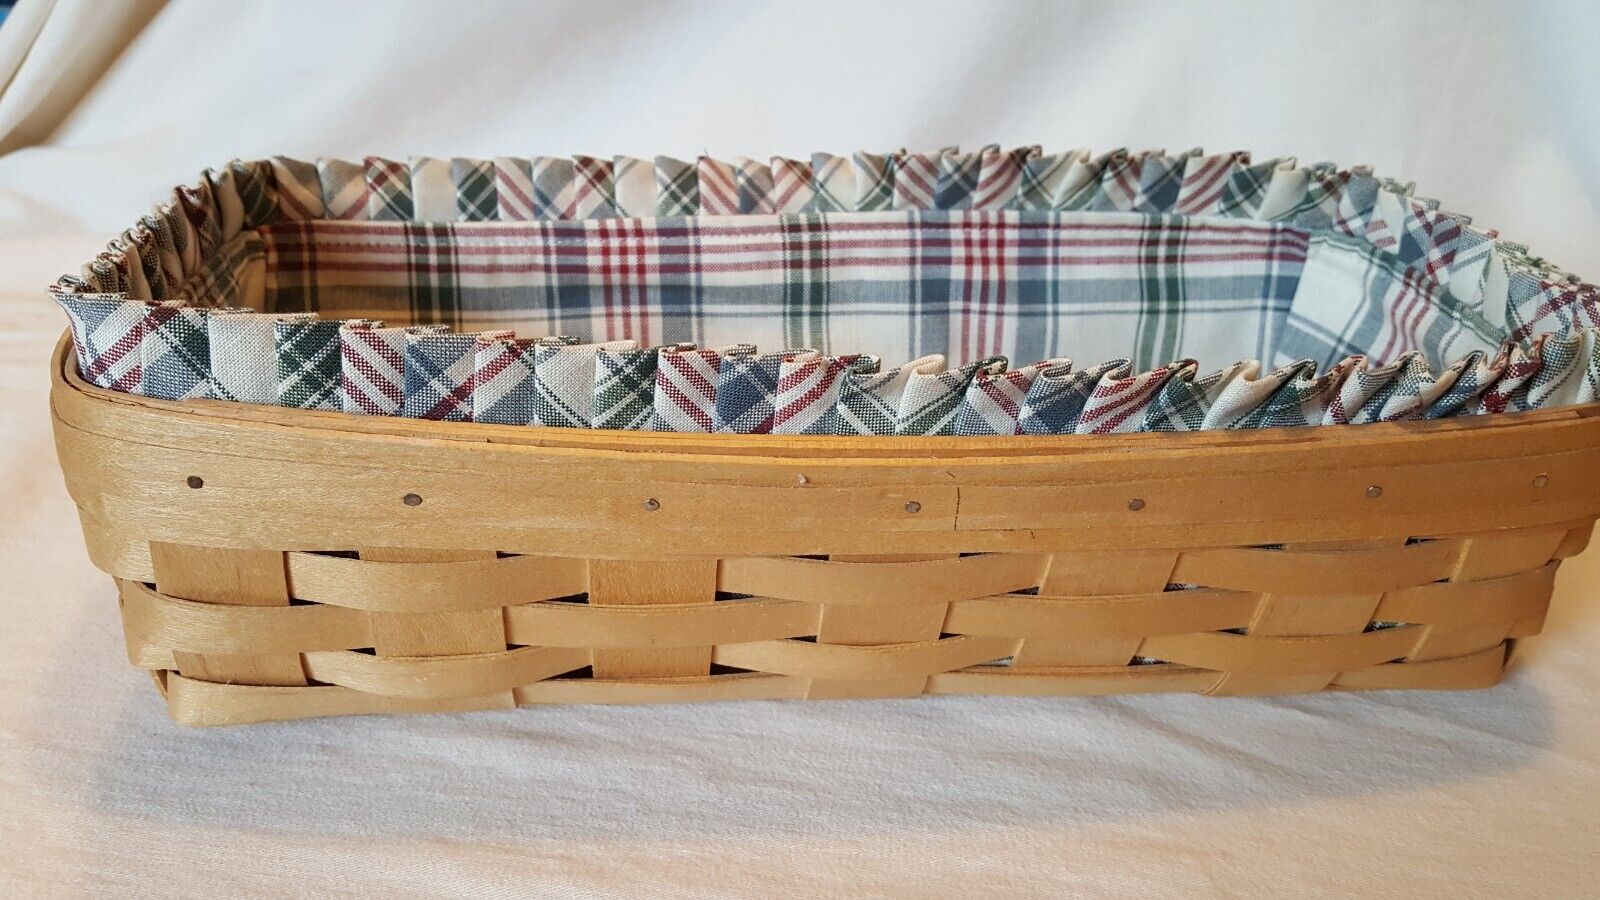 Longaberger Woven Traditions Bread Basket with Market Day fabric liner 14.5x8